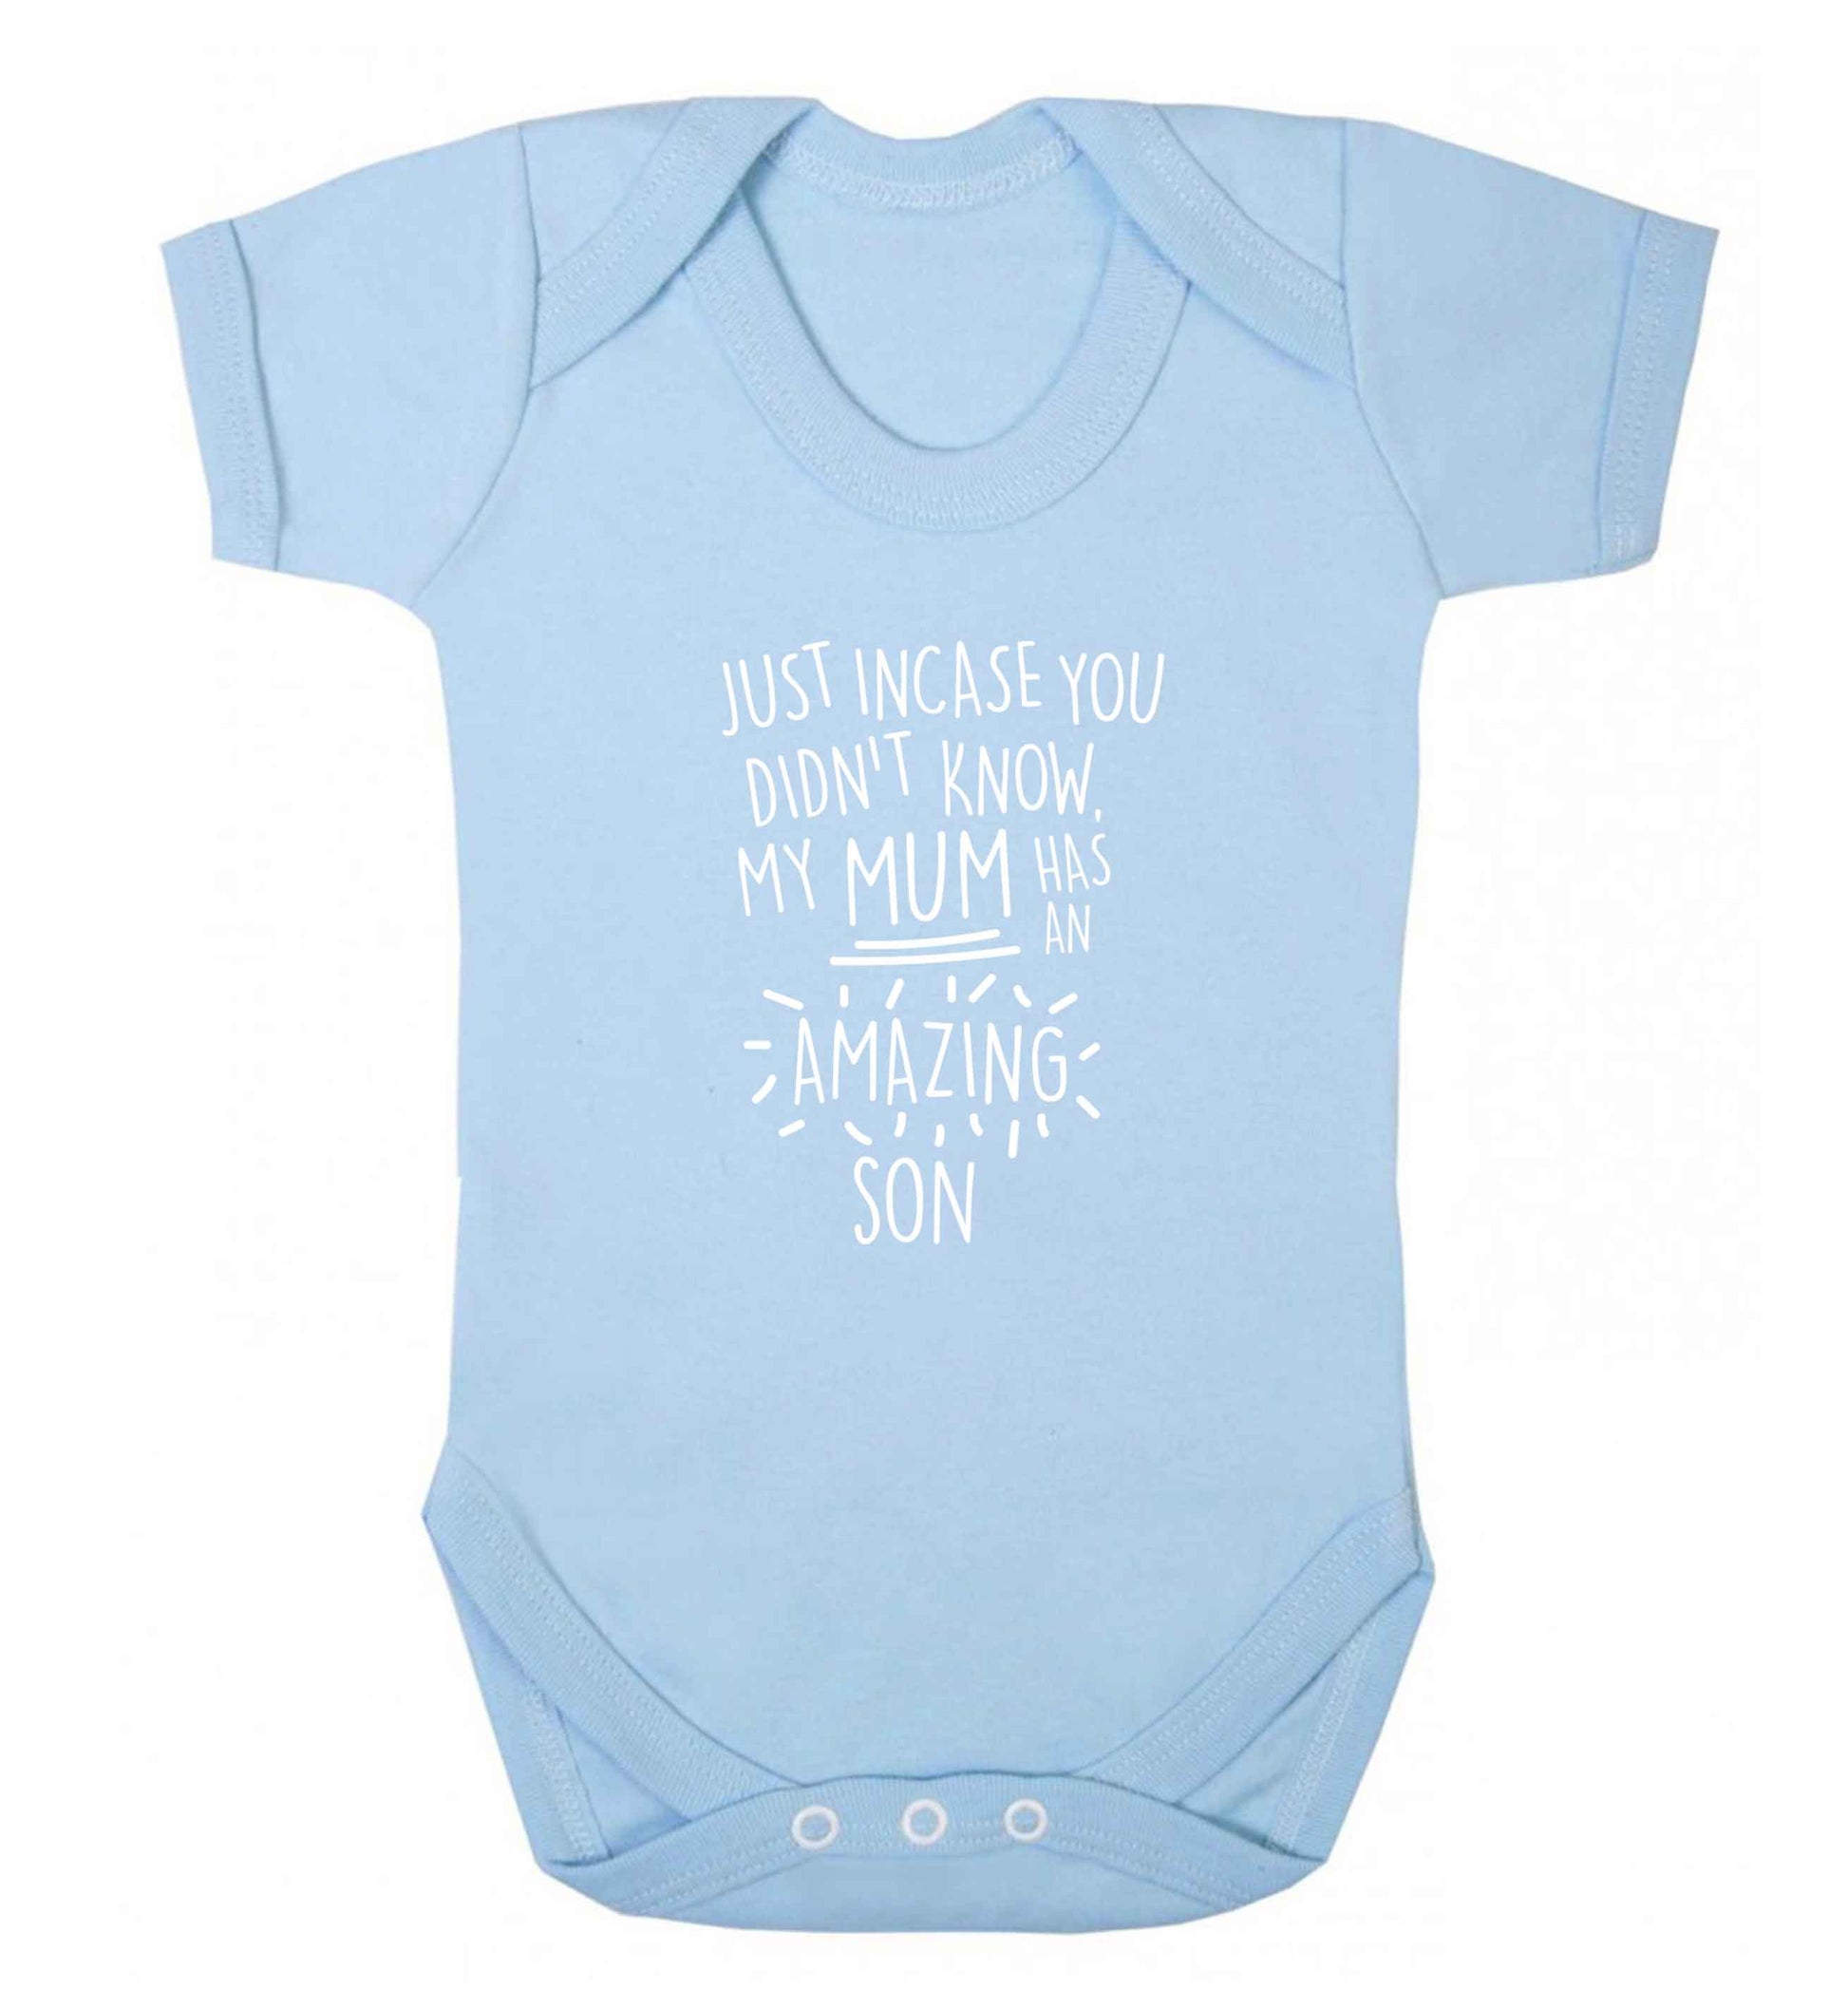 Just incase you didn't know my mum has an amazing son baby vest pale blue 18-24 months